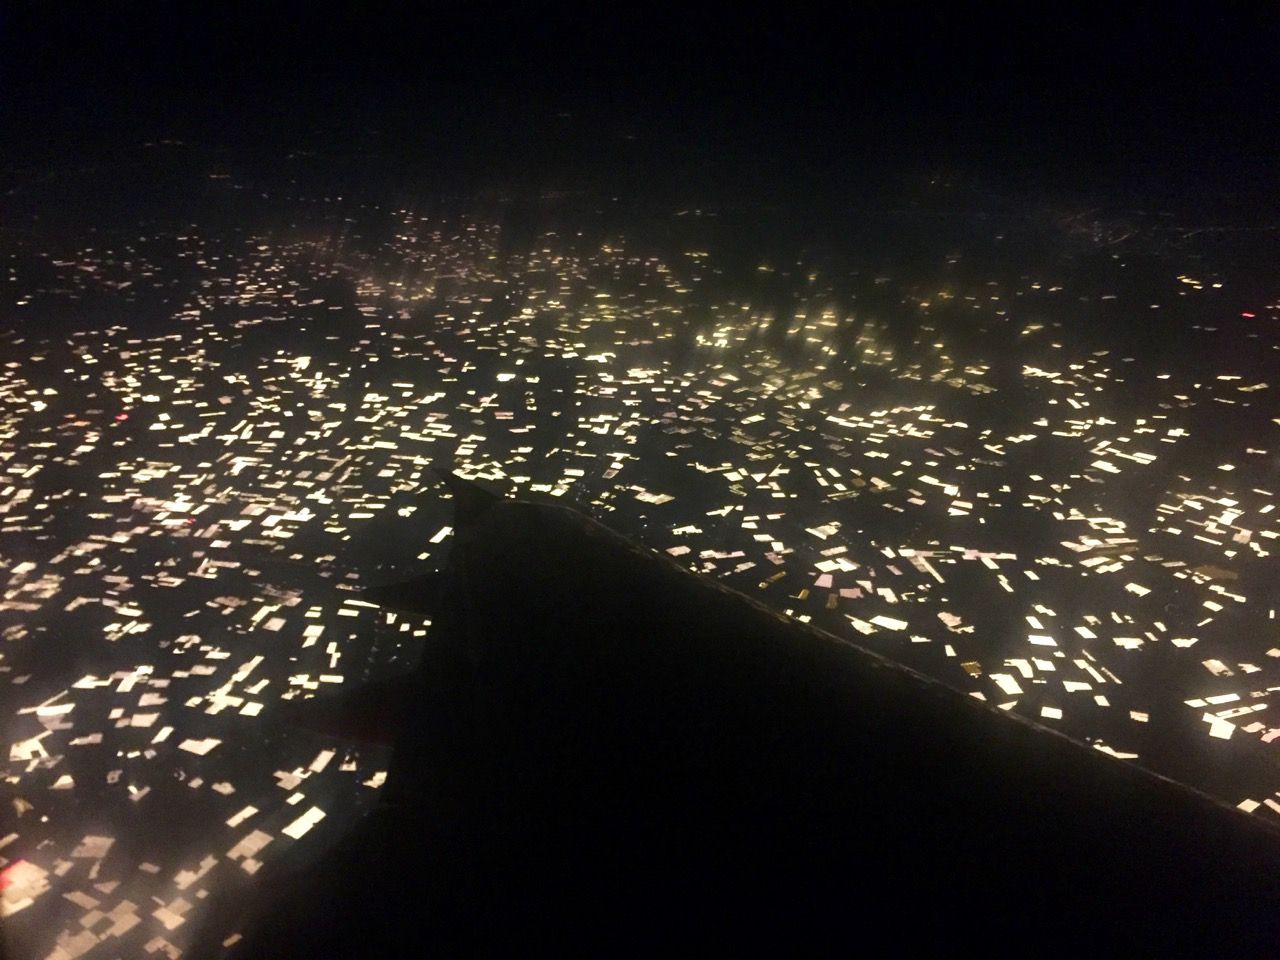 Geometric lights as seen from an airplane.